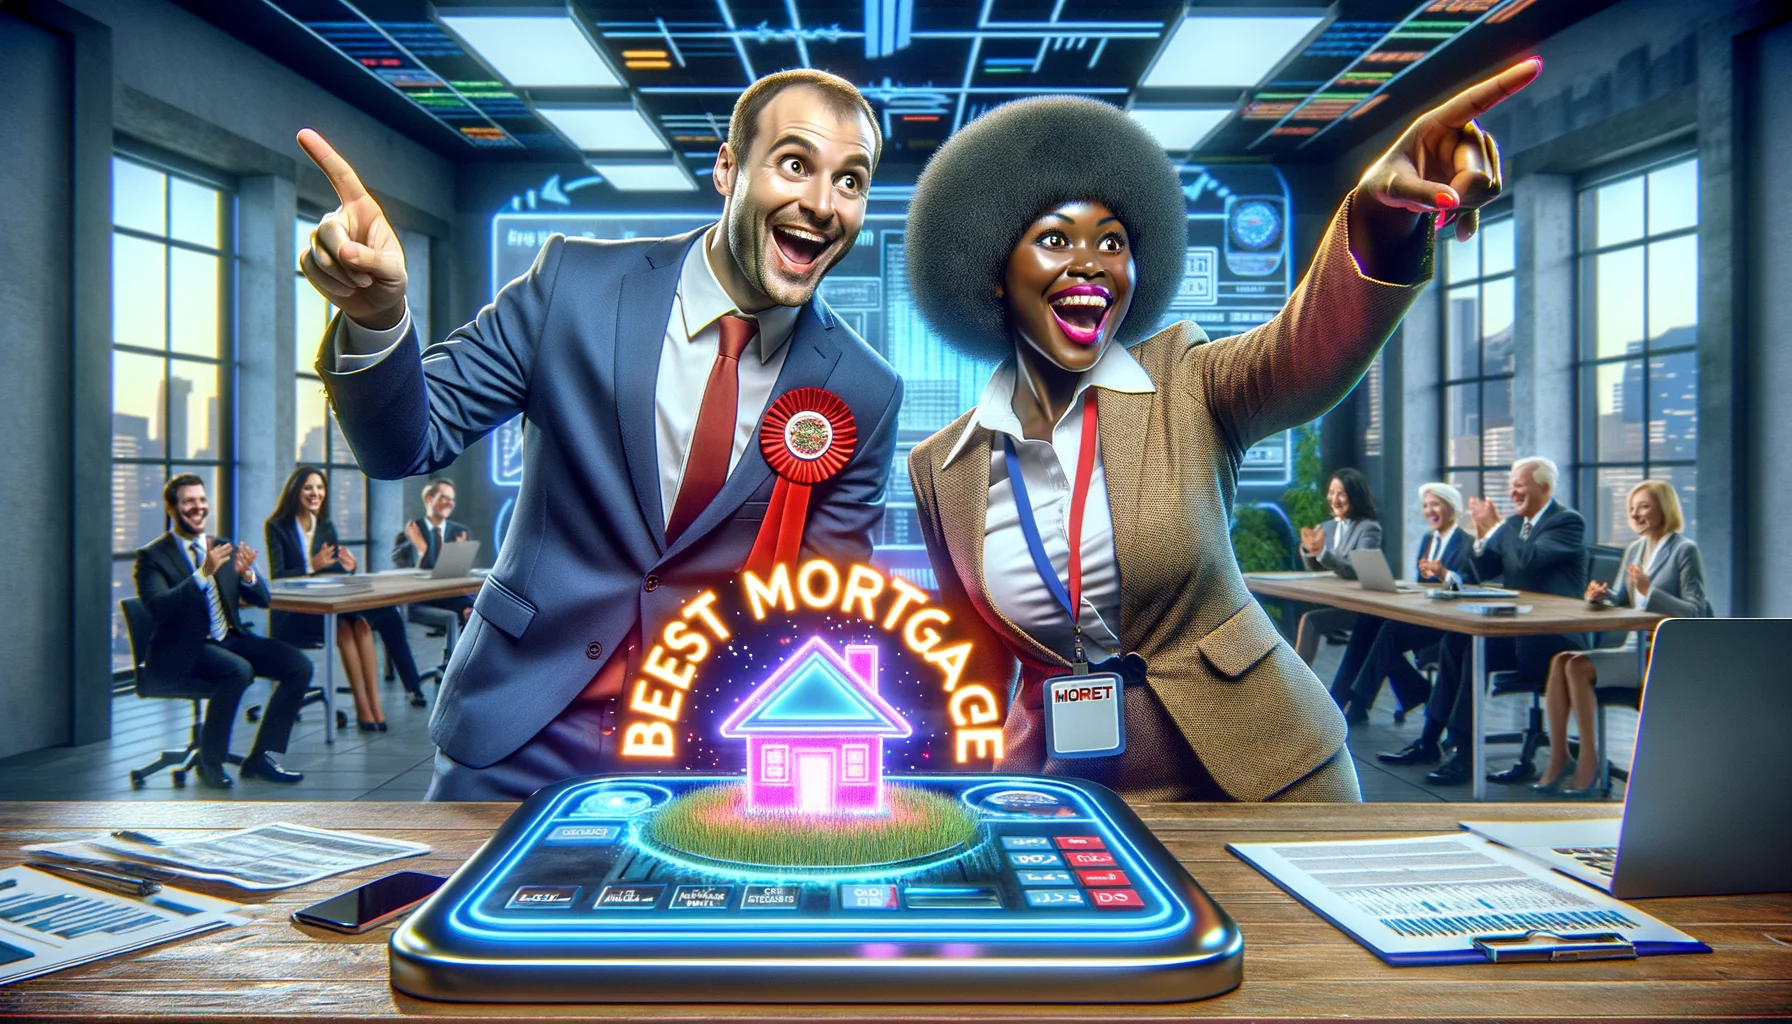 Create a humorous and realistic image where a Caucasian man dressed as an accountant and a Black woman with a badge indicating her as a financial advisor are enthusiastically using futuristic financial tools. They are in a modern office environment filled with state-of-the-art technology. In the center is a large glowing mortgage calculator projecting the best possible mortgage scenarios. Colors are vibrant and the mood is jubilant, signifying the perfectness of the scenario.